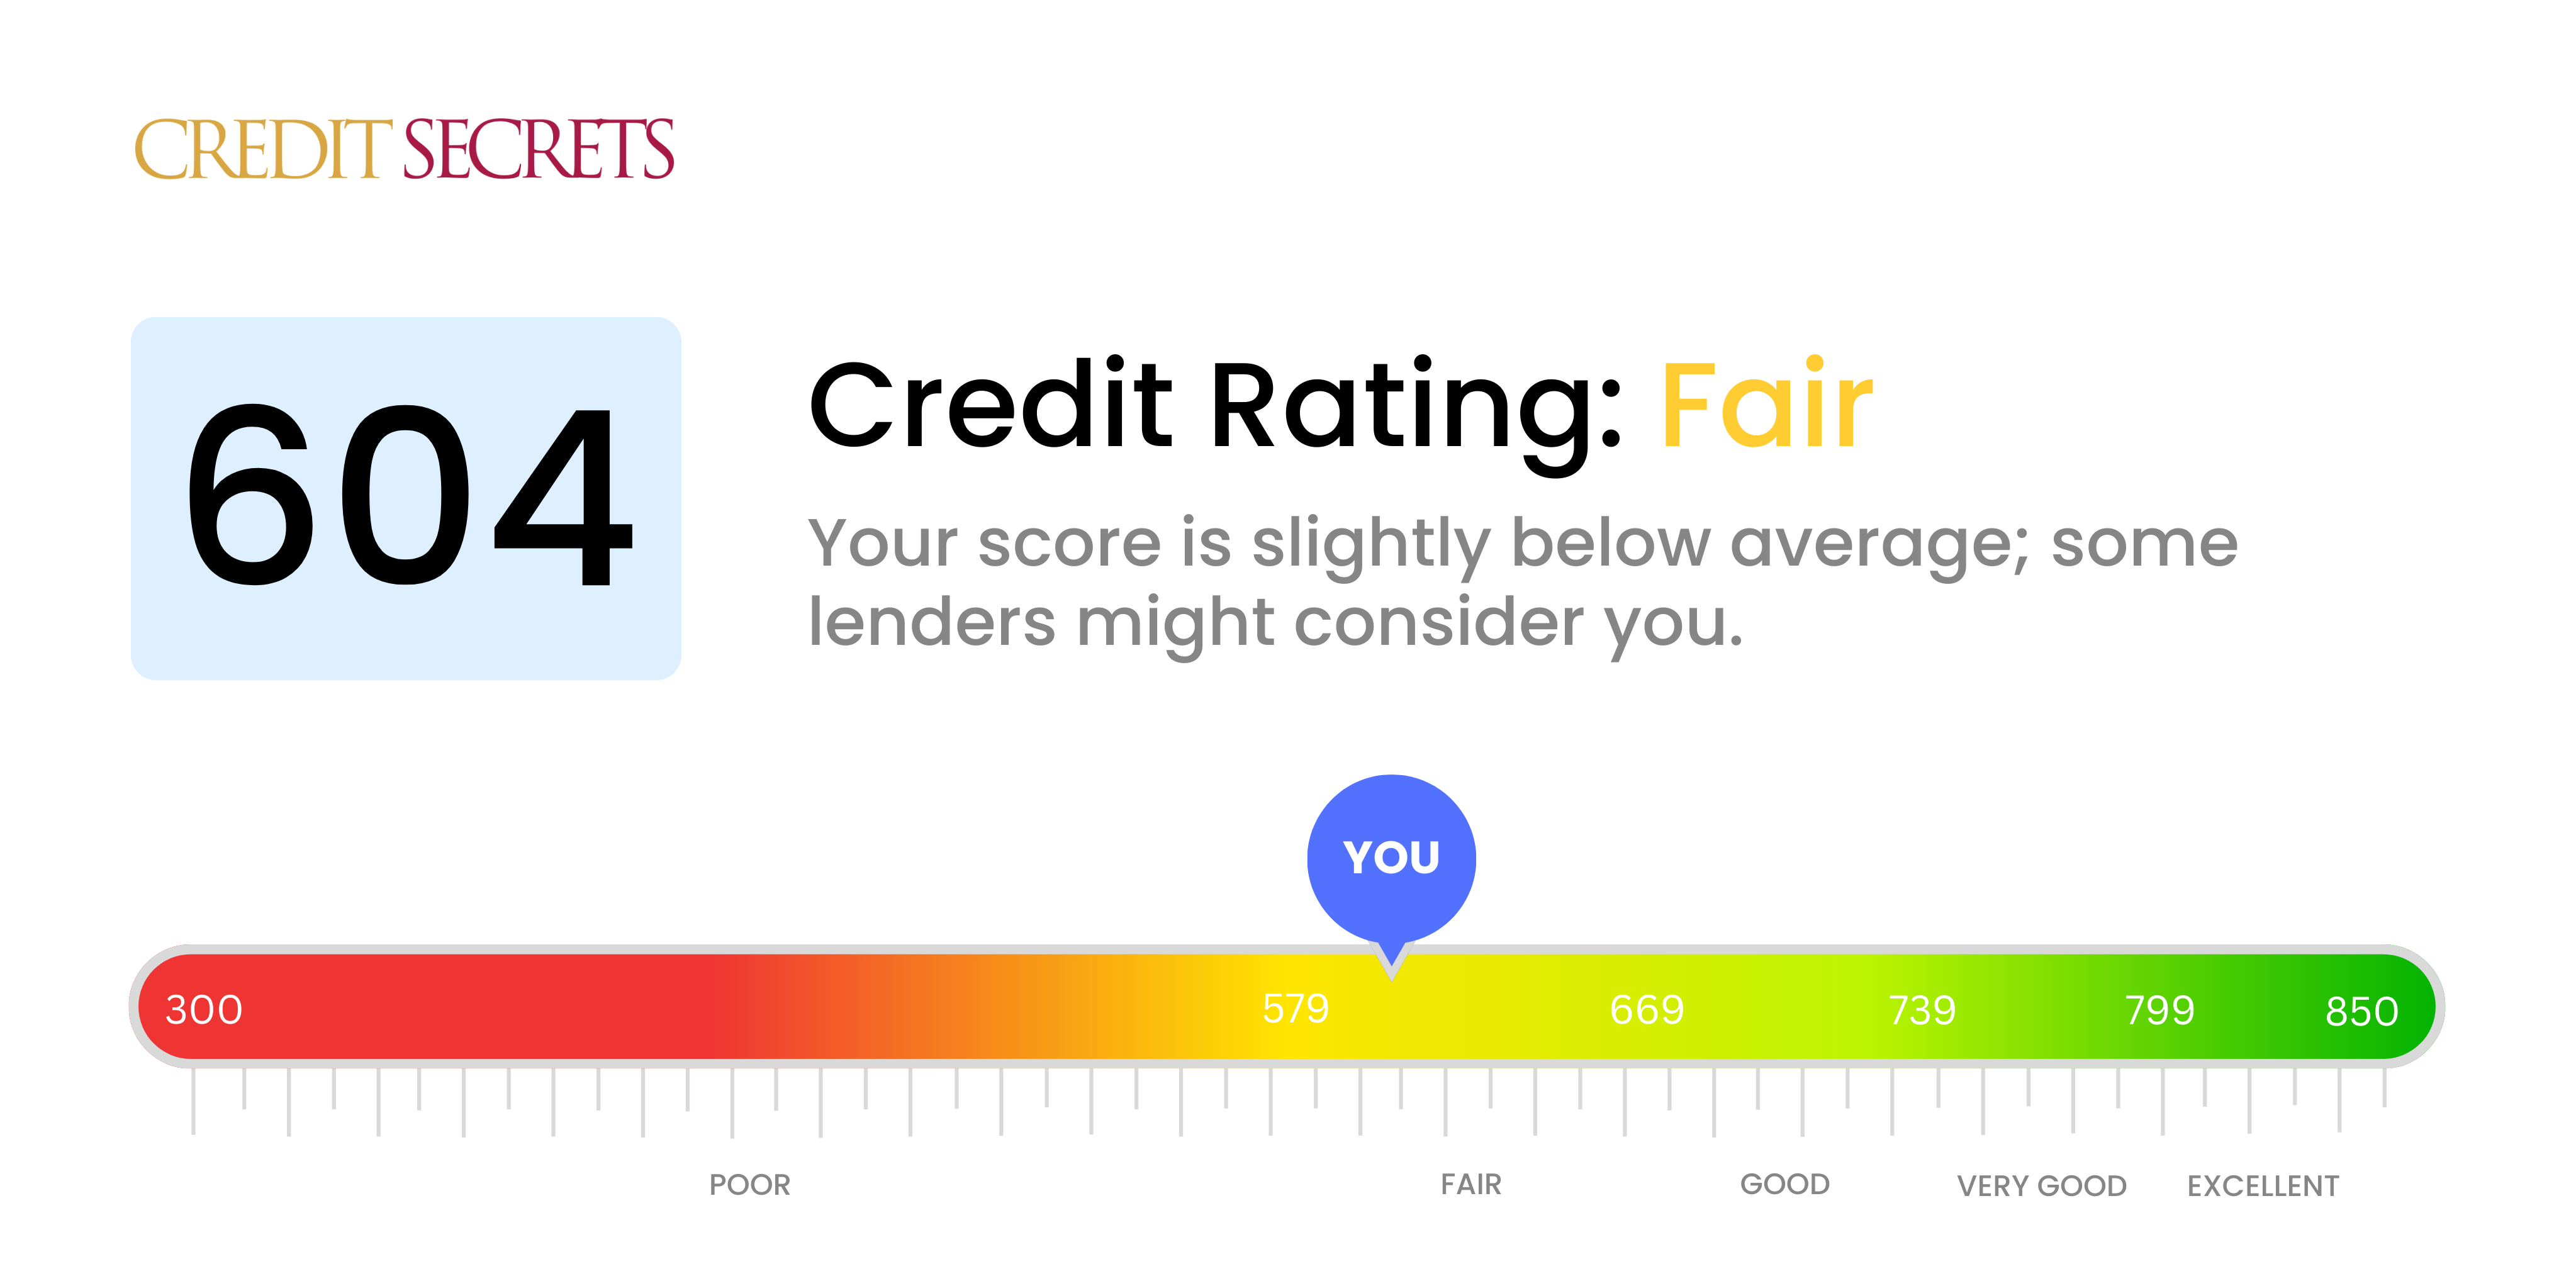 Is 604 a good credit score?